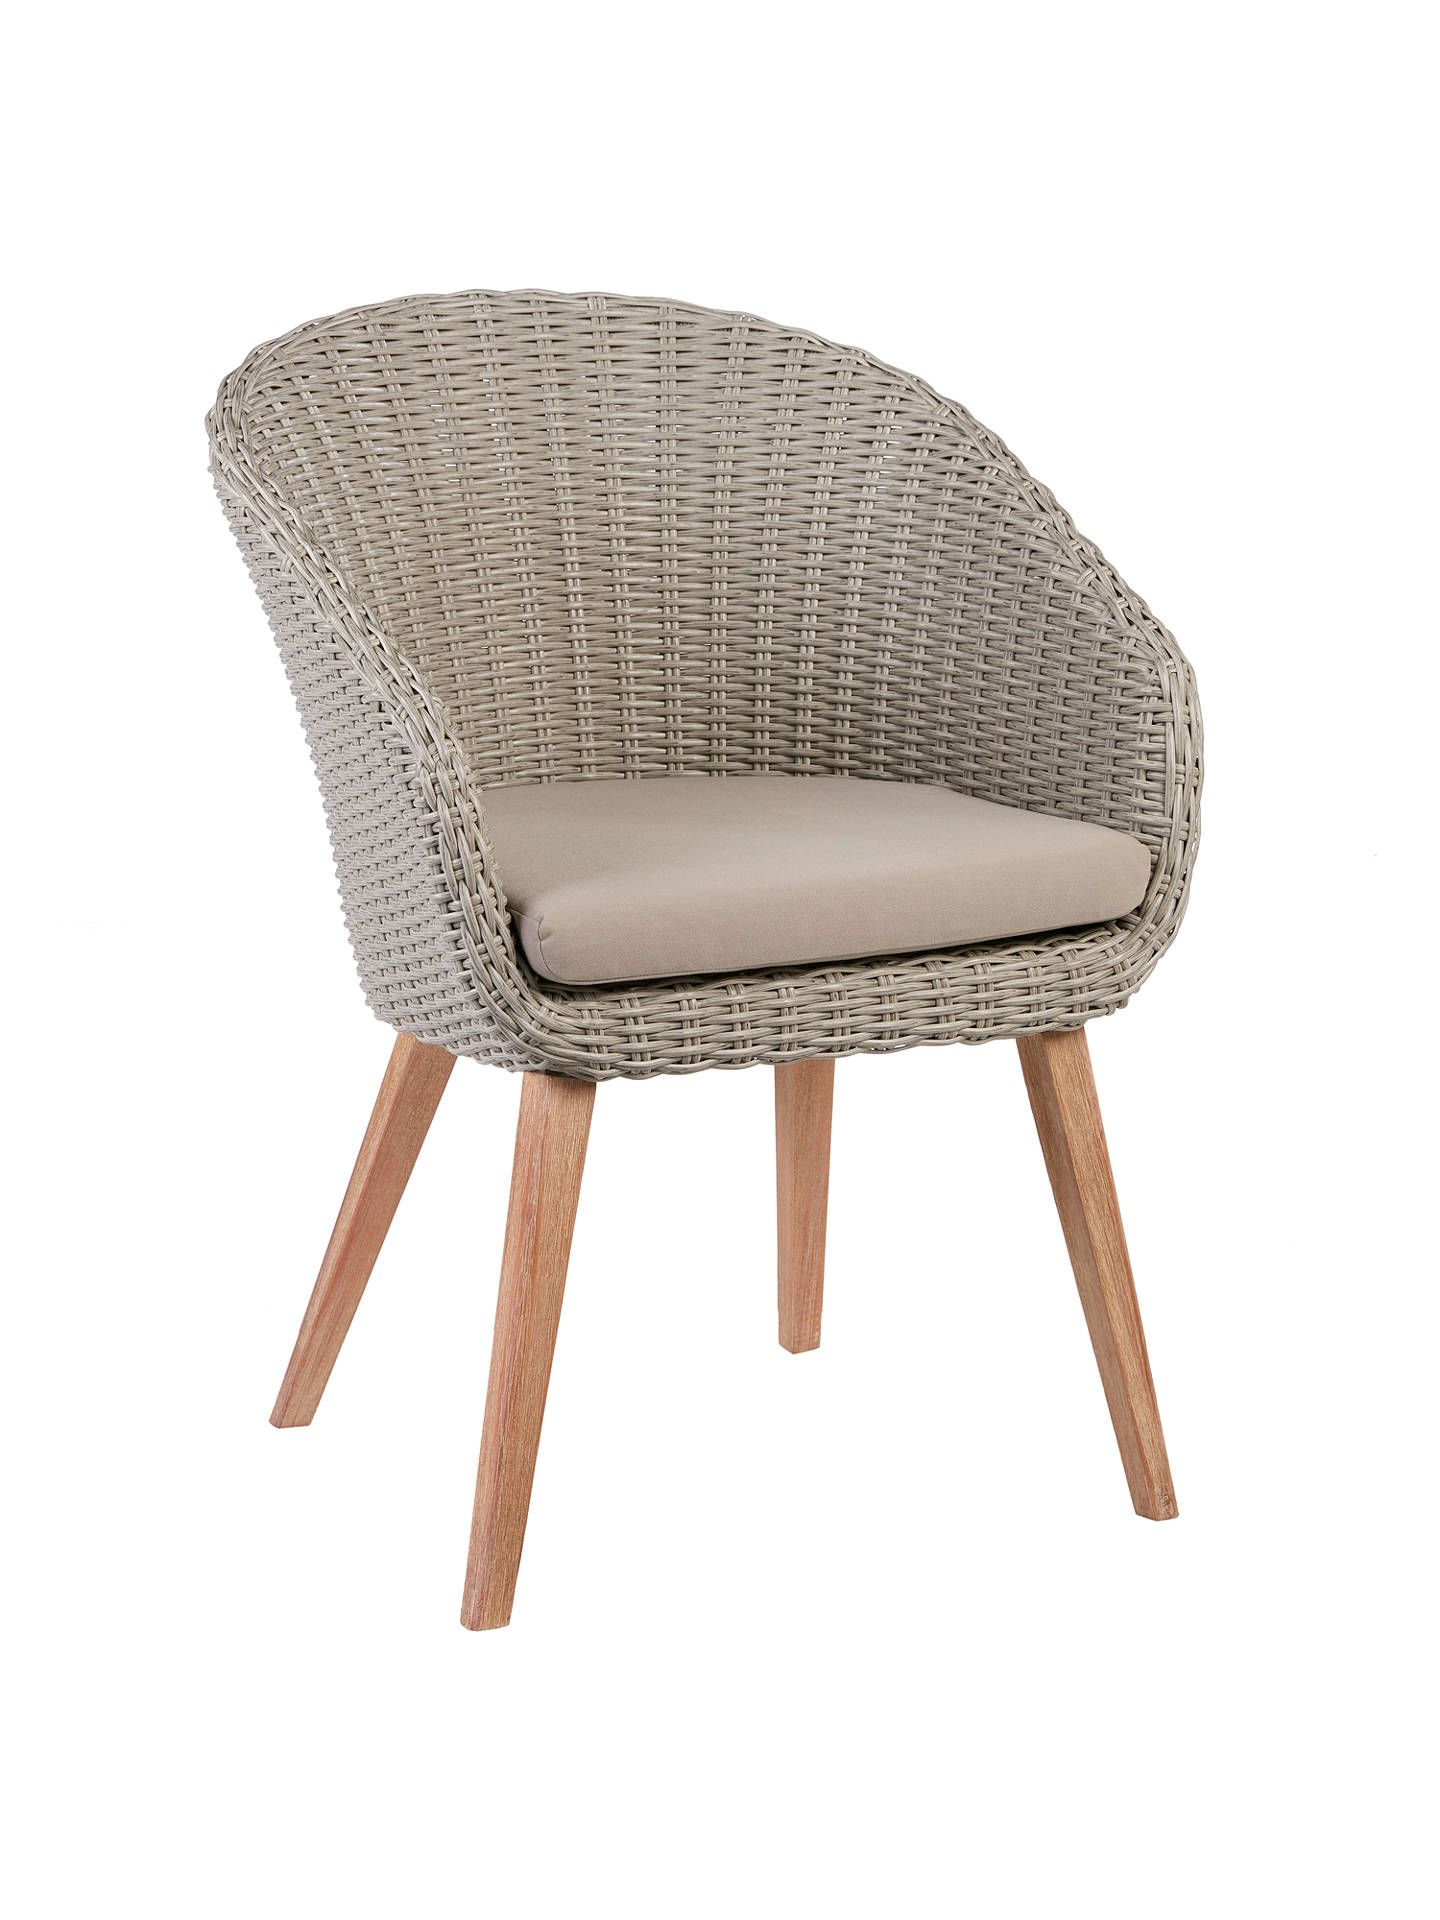 V Brand New To John Lewis Sol Four Seater Round Garden Table & Chairs ISP £999 (John Lewis) Stock - Image 3 of 3